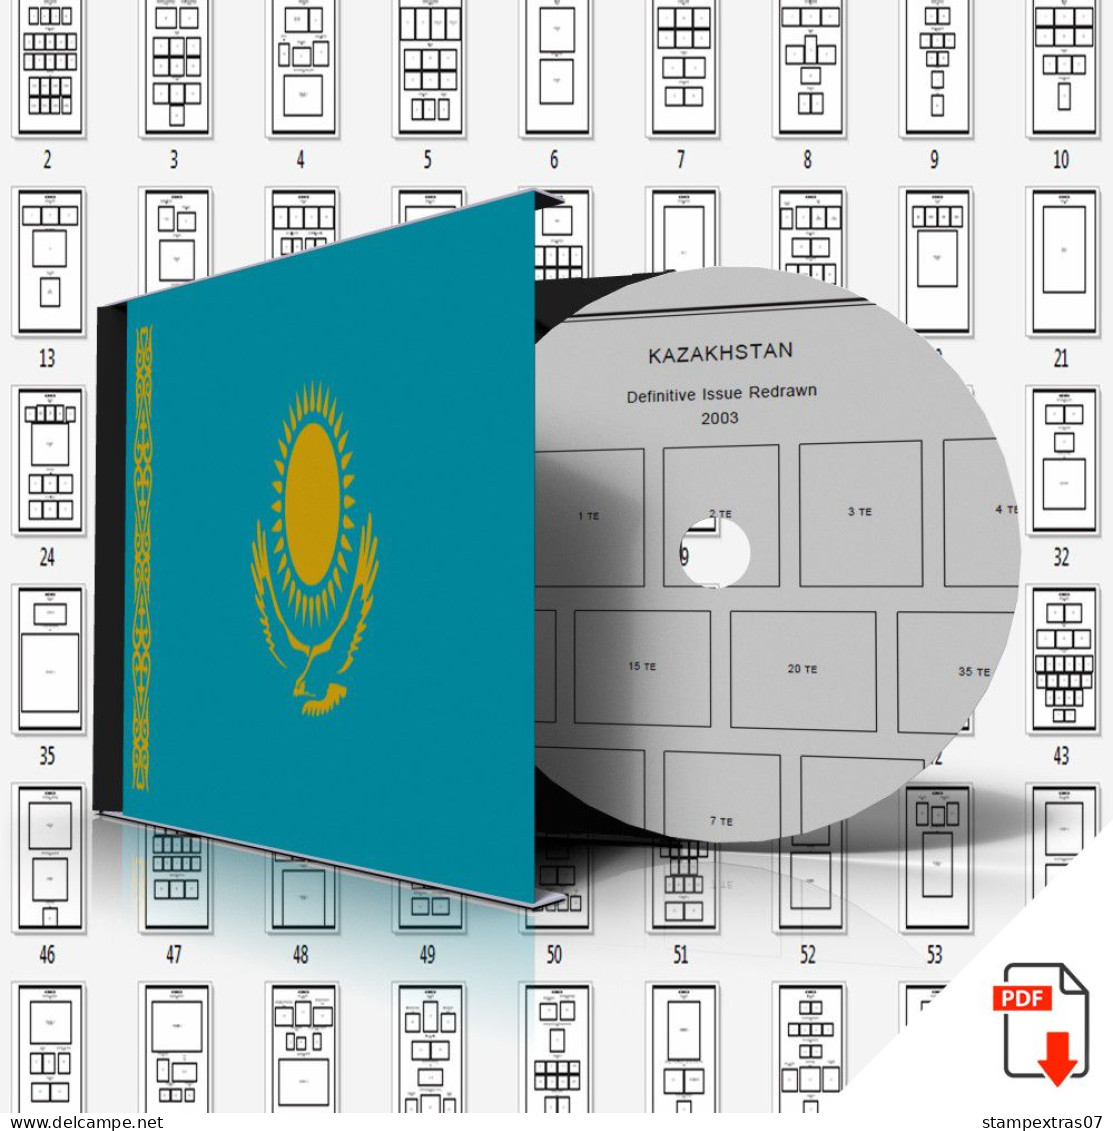 KAZAKHSTAN STAMP ALBUM PAGES 1992-2011 (82 Pages) - Anglais